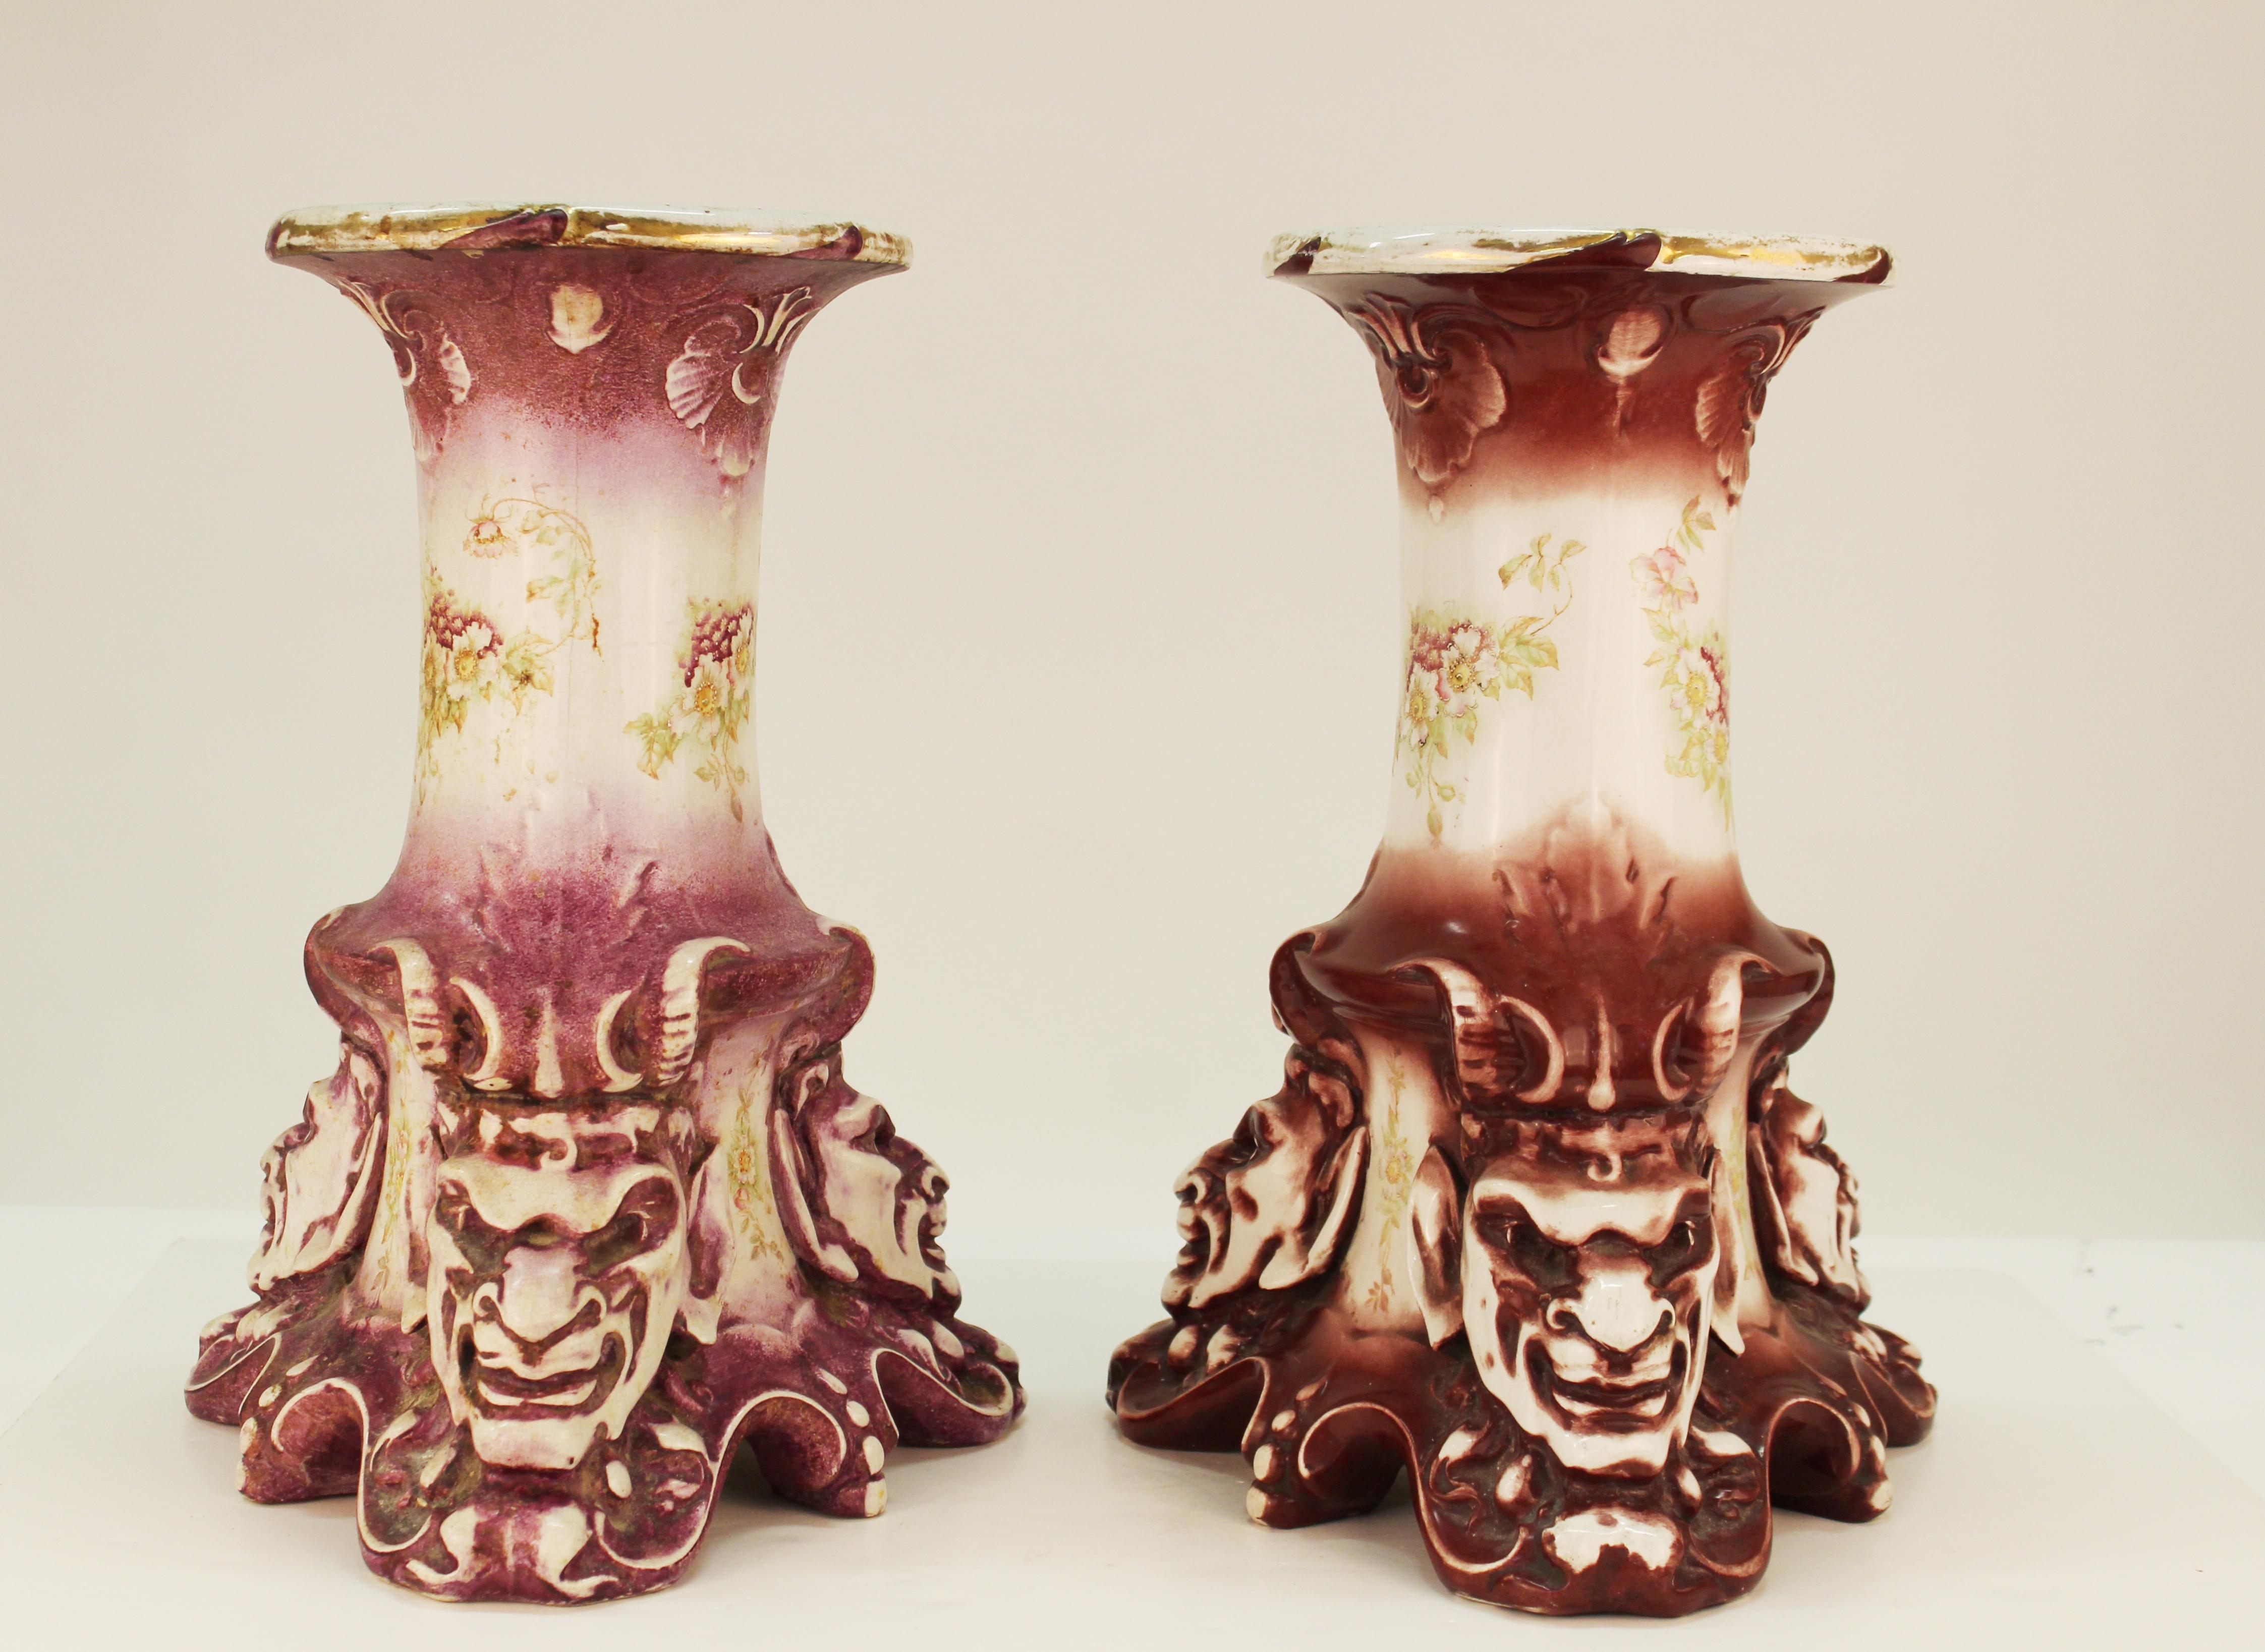 Pair of Victorian period hand-painted ceramic pedestals in grotesque style with horned satyr heads at the base, made by Alba China. The pair is stamped at the bottom with a mark reading 'Bona Fama est mellor zona aurea' ('A good reputation is better